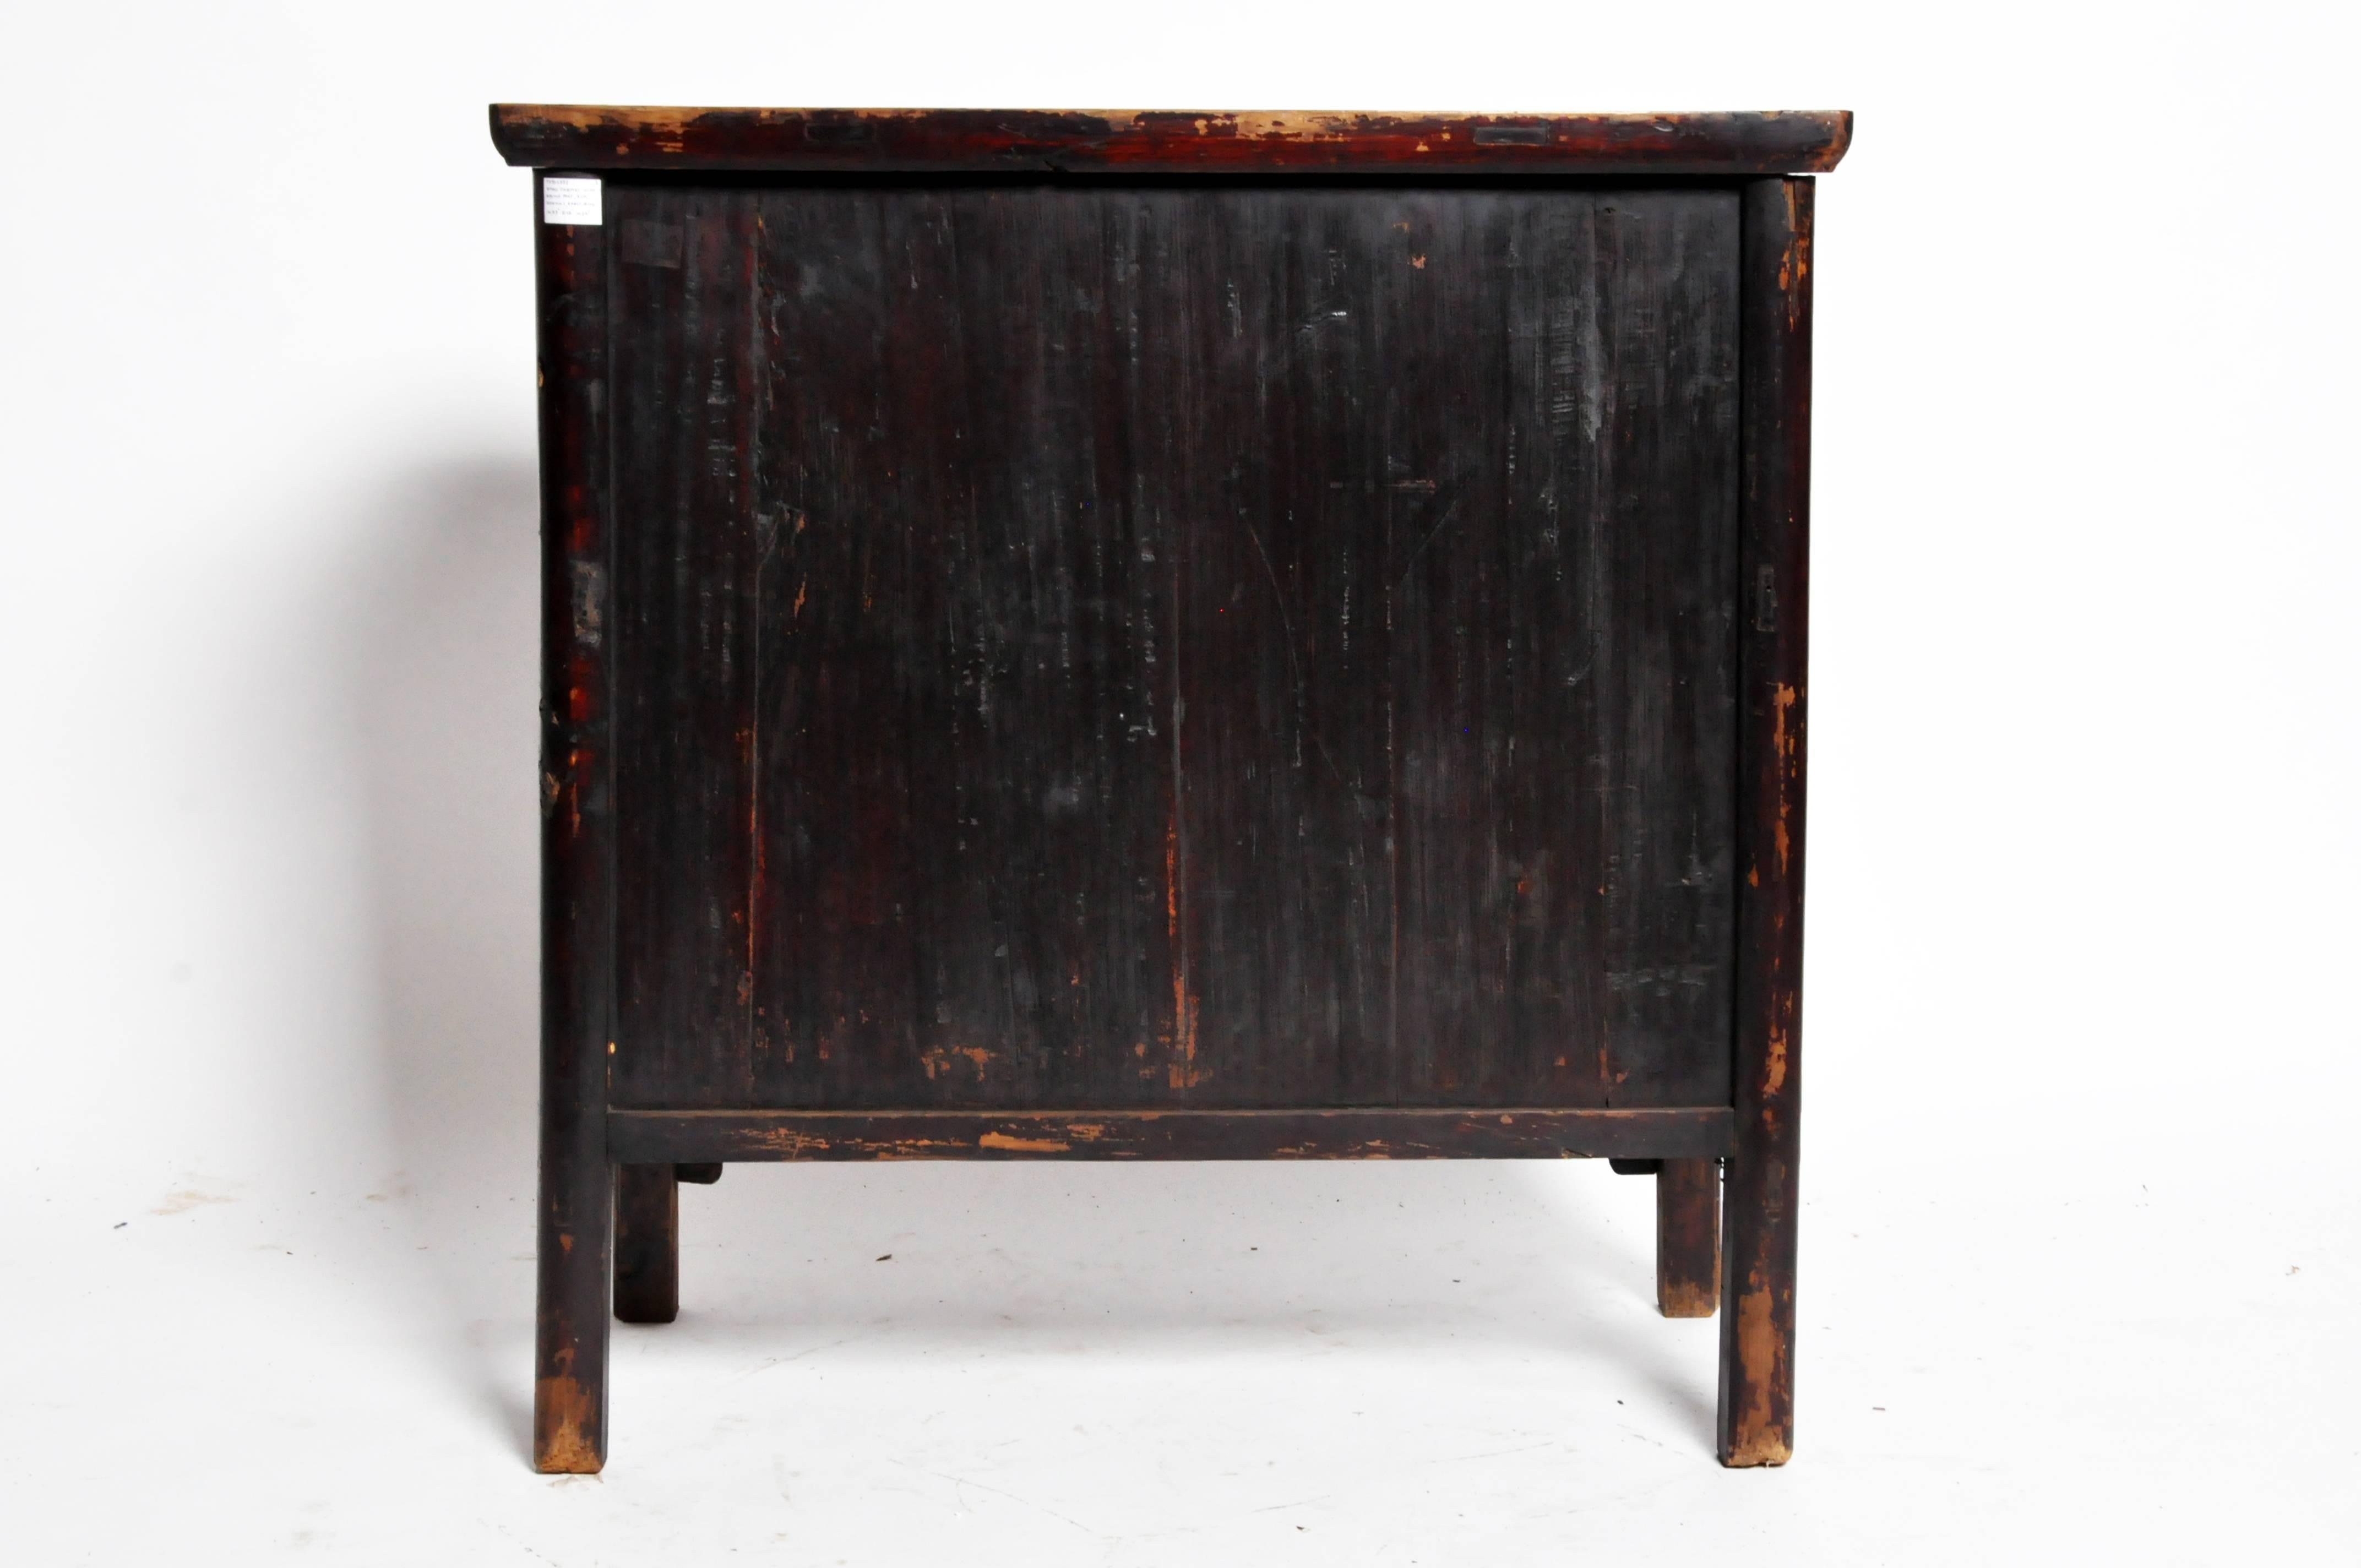 This Qing dynasty Chinese chest is from Shanxi, China and was made from elmwood. This piece features round posts, two drawers, and original patina.